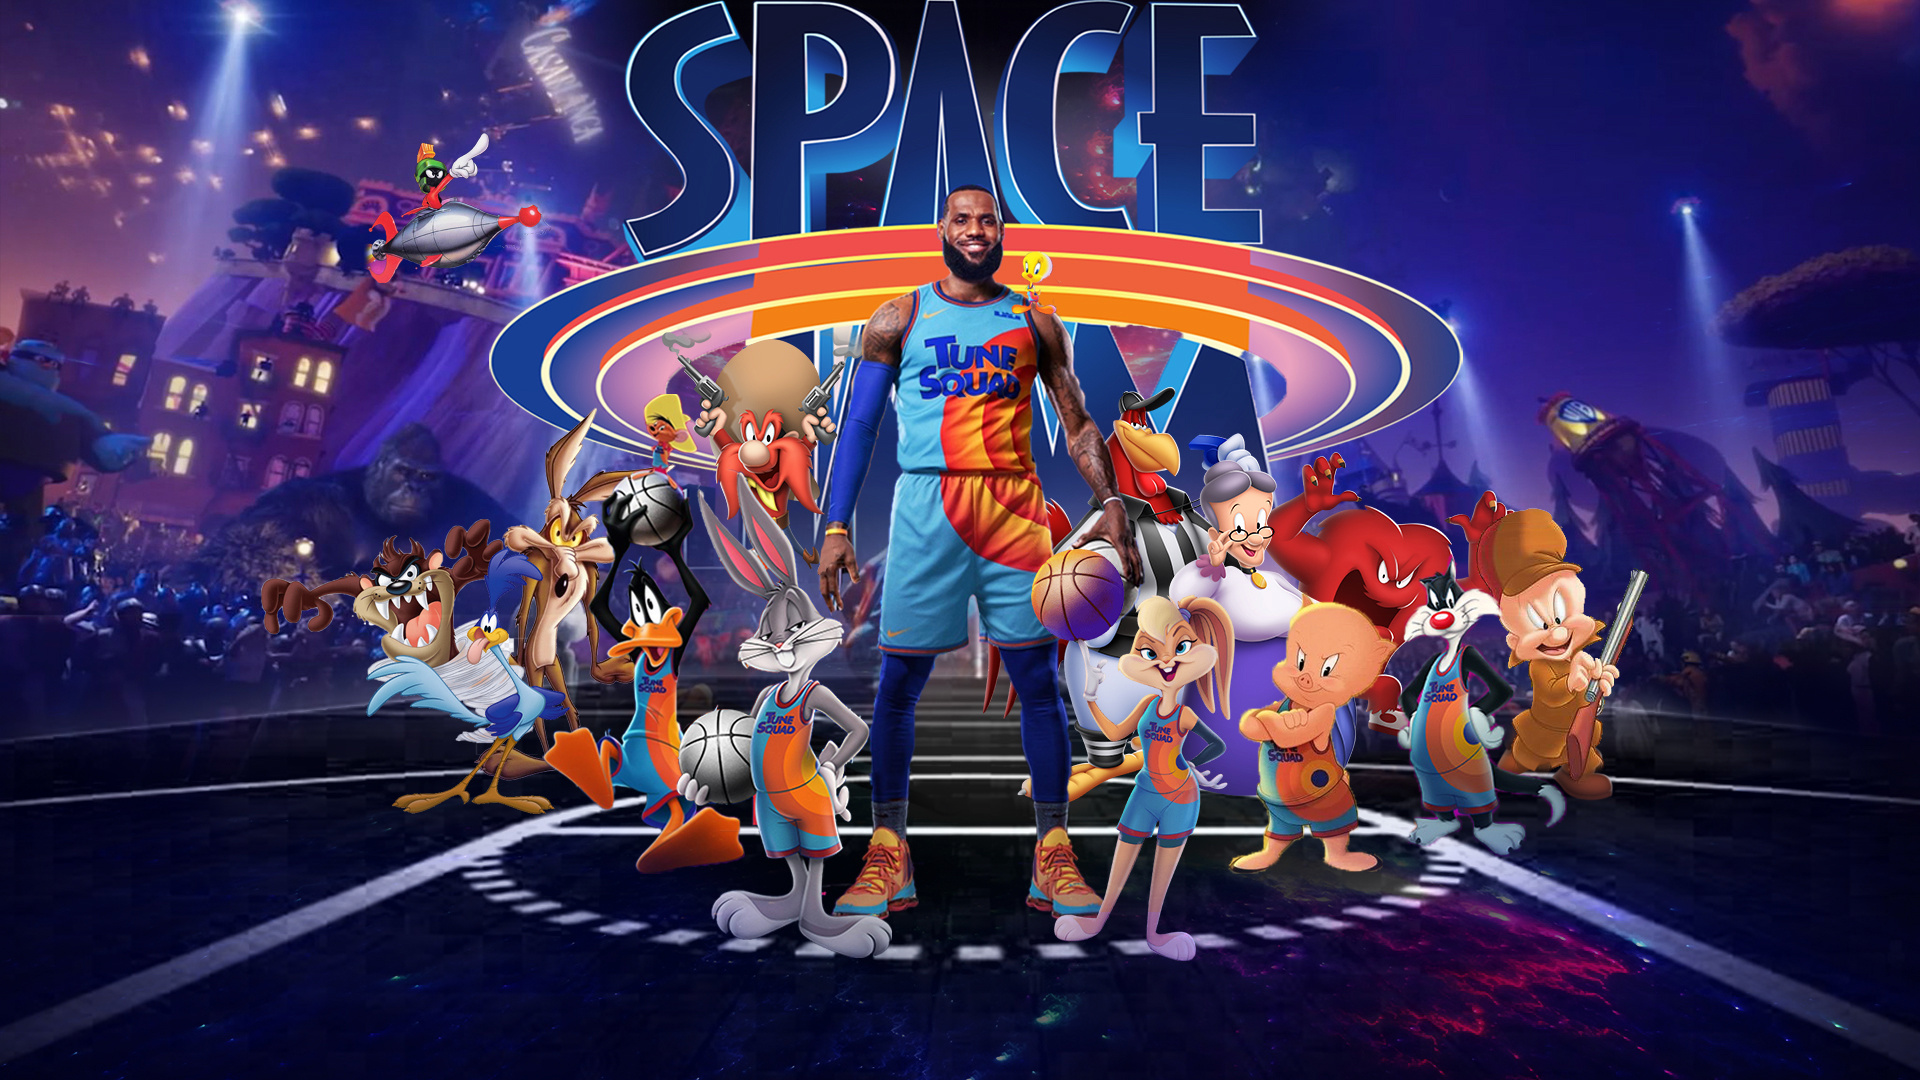 Space Jam: A New Legacy, Tune Squad, Iconic Tune Squad logo, Athlete and cartoon crossover, 1920x1080 Full HD Desktop